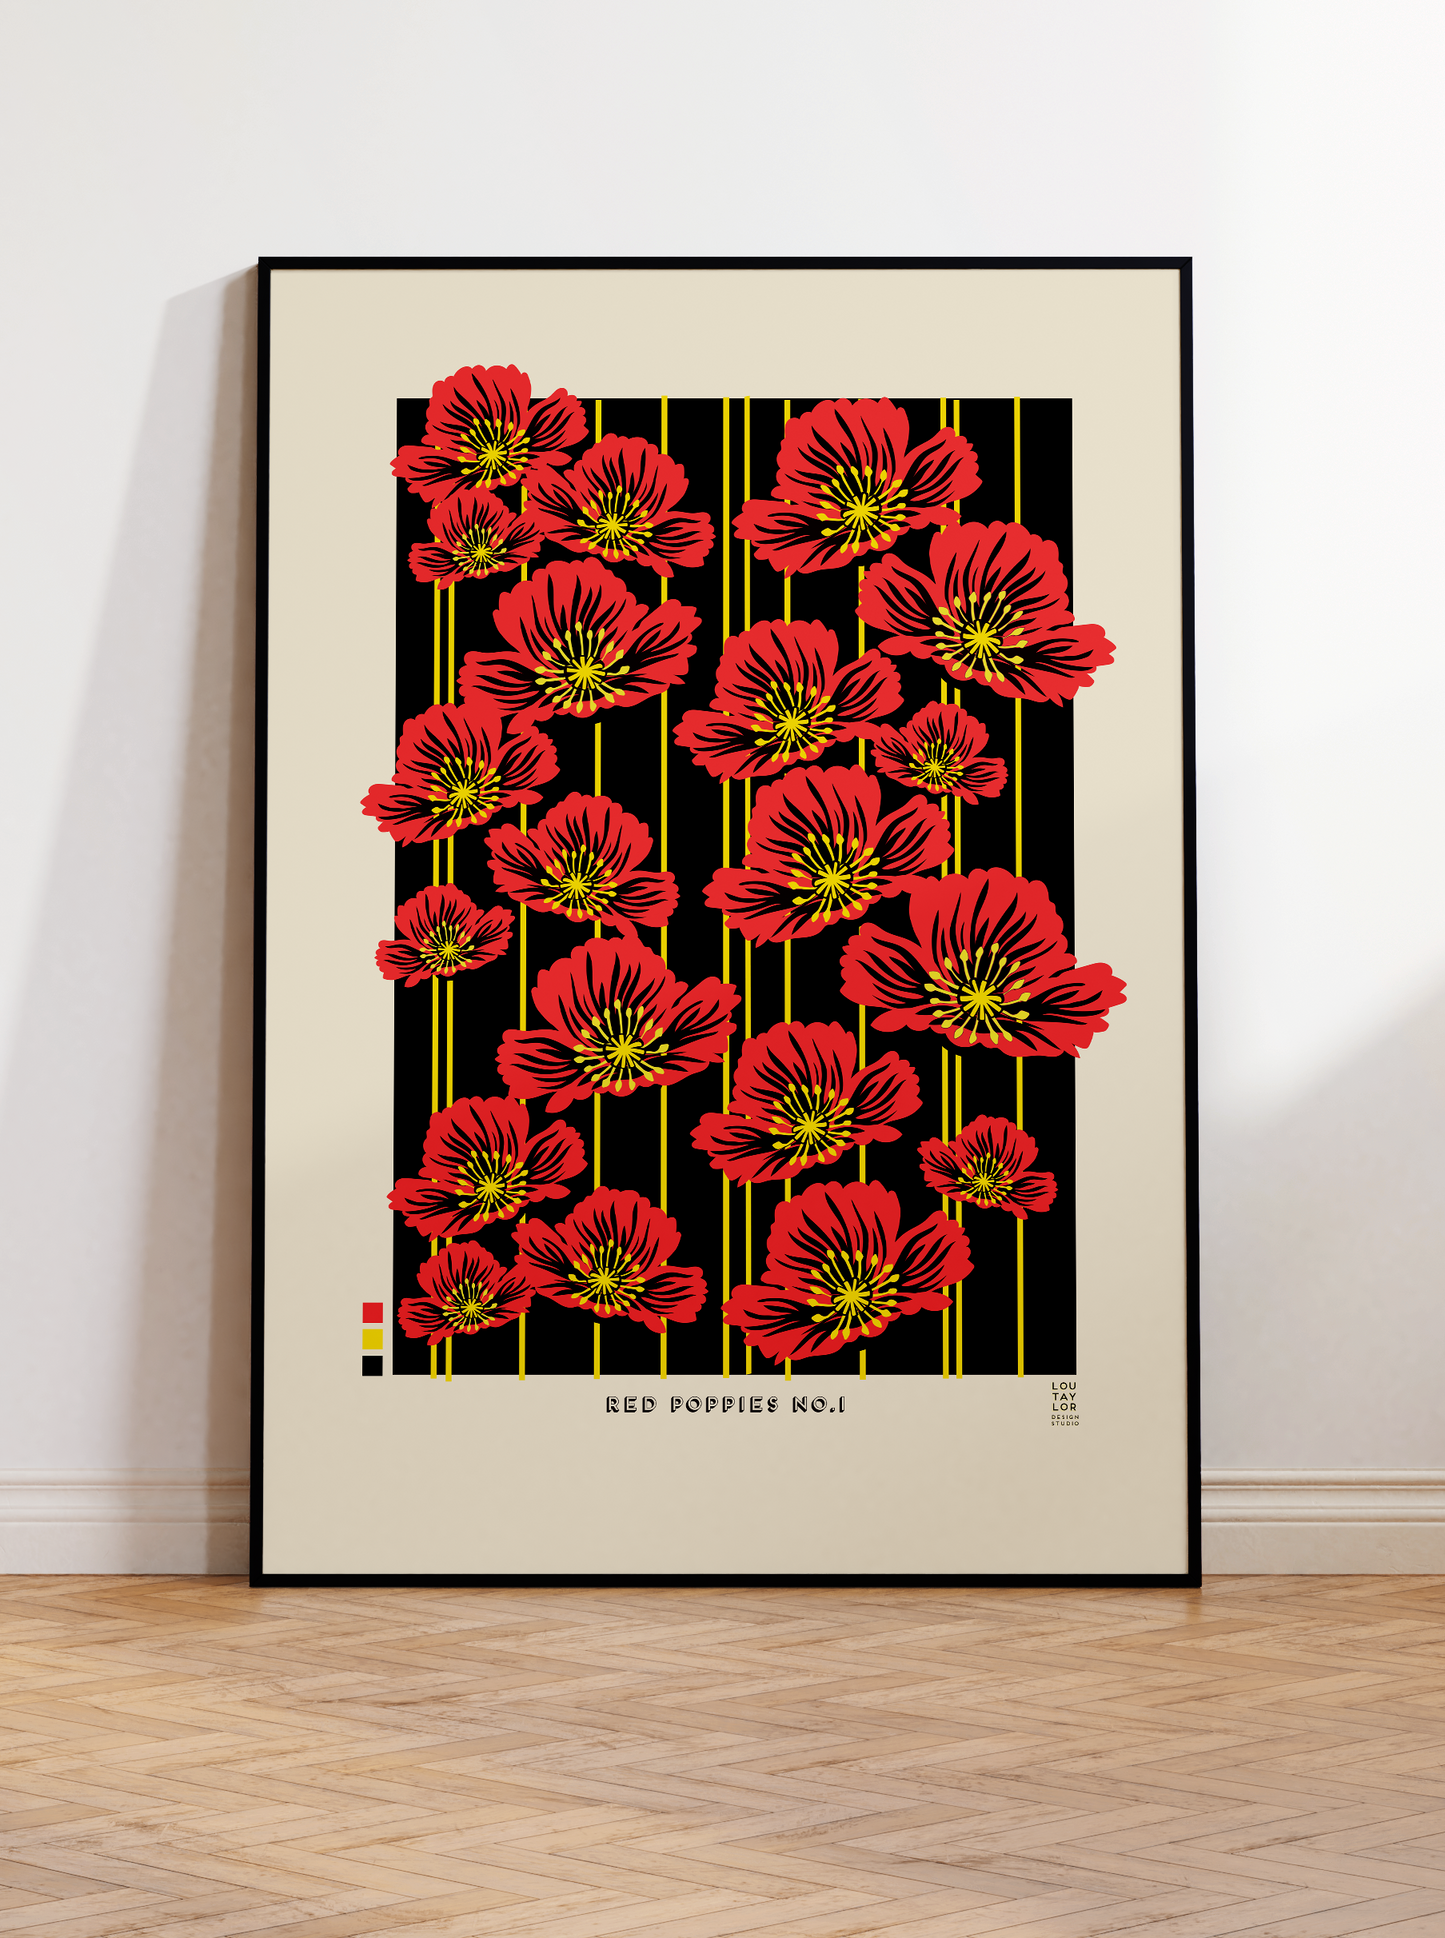 Red Poppies No.1